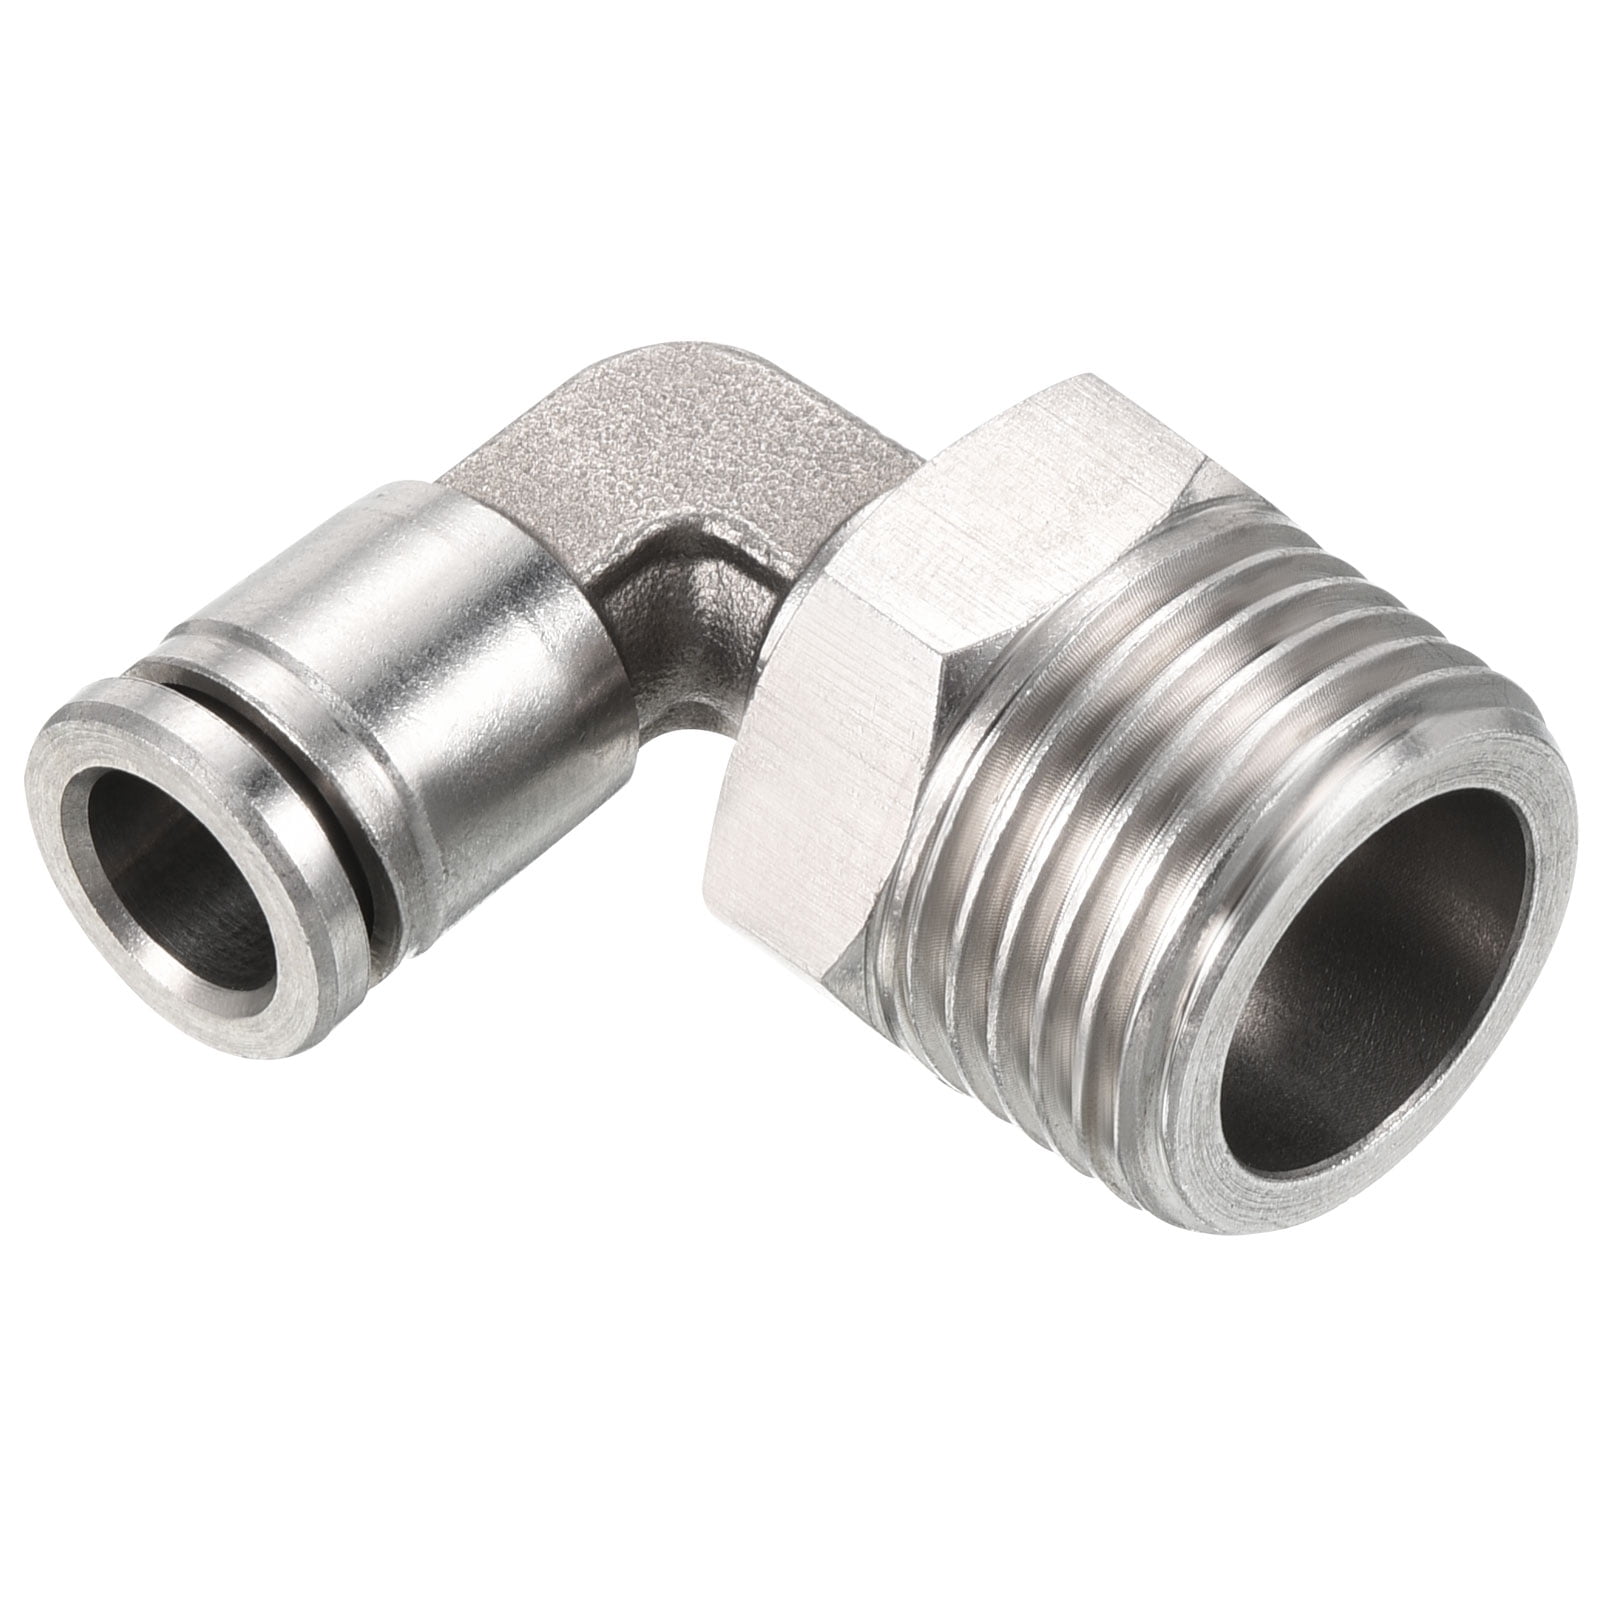 Uxcell 8mm 1/2BSPT Male Thread 304 Stainless Steel Push to Connect ...